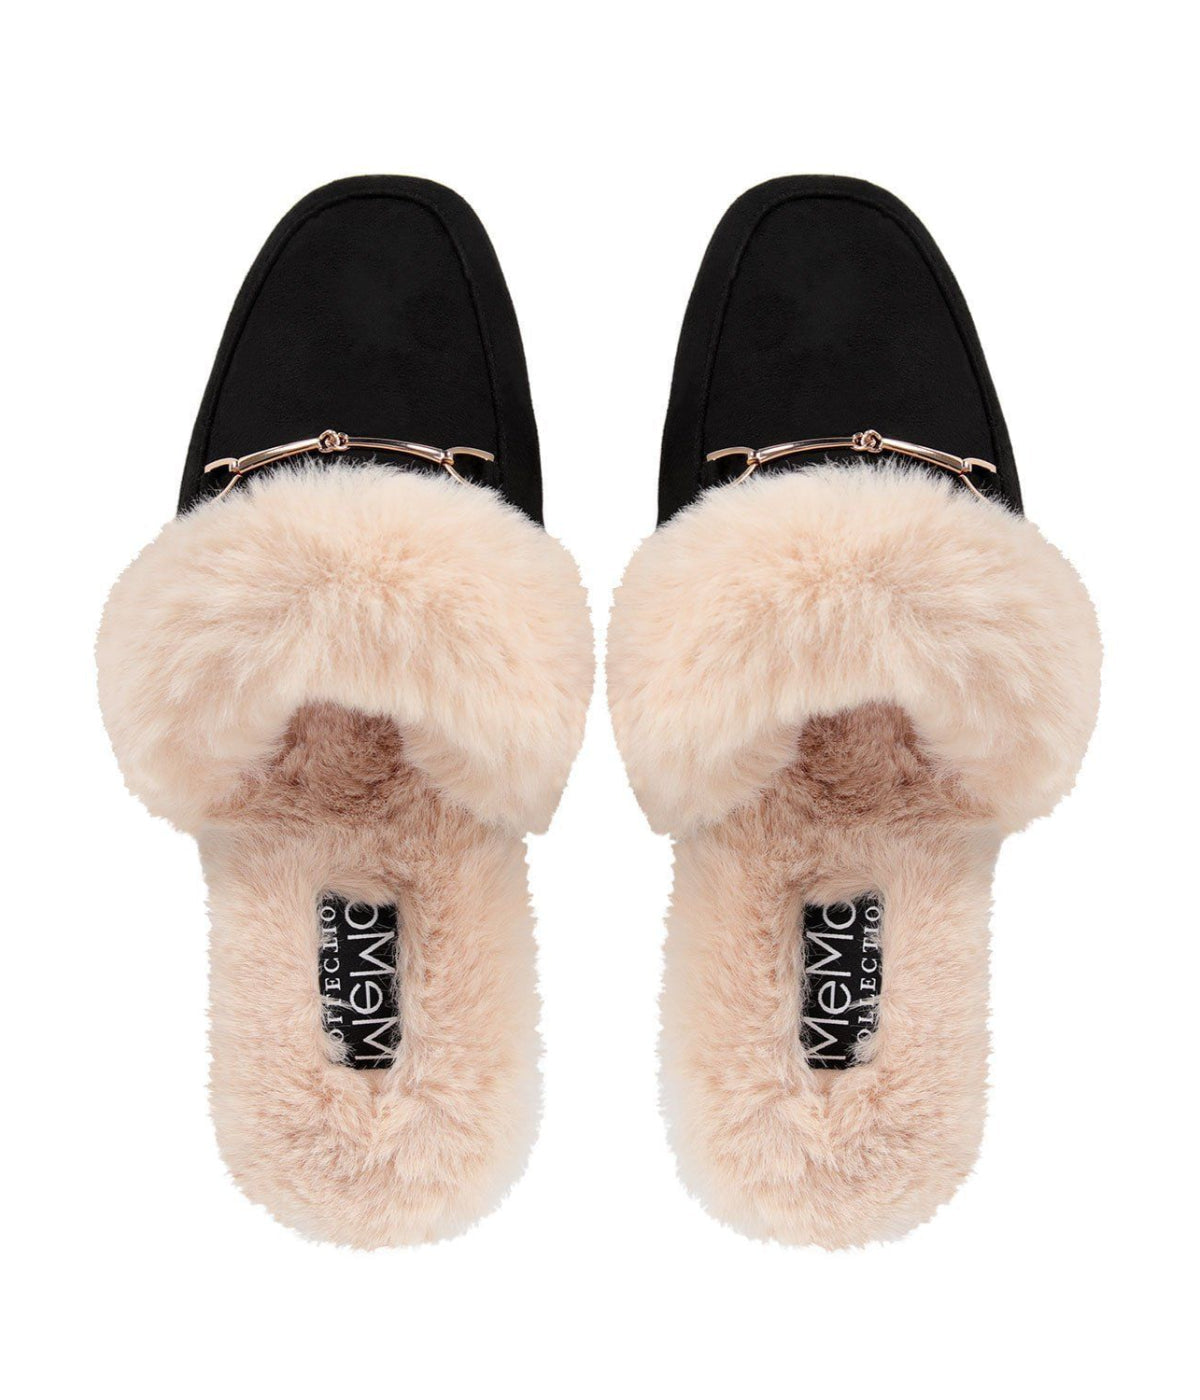 Women's The Brixton Mule Faux-Fur Lined Loafer Slippers Black